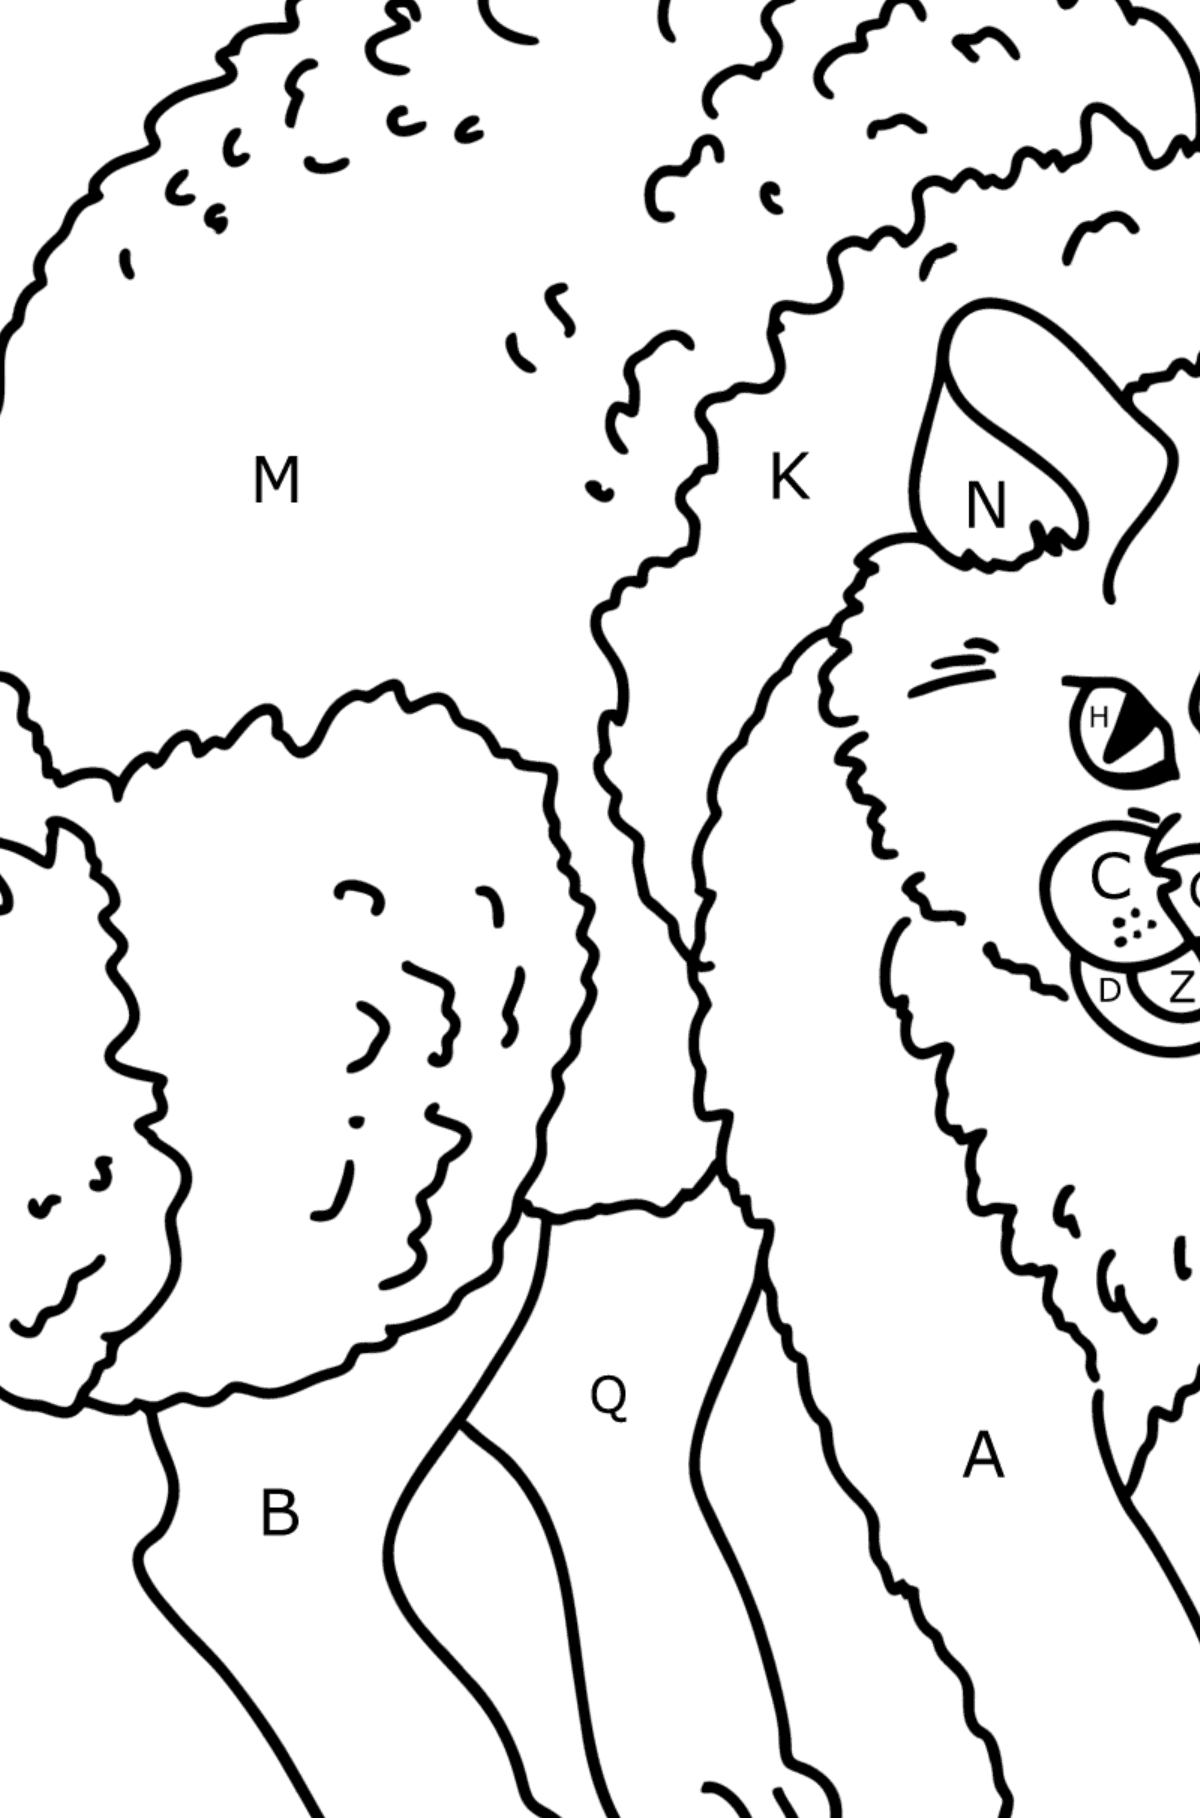 Grumpy Cat coloring page - Coloring by Letters for Kids